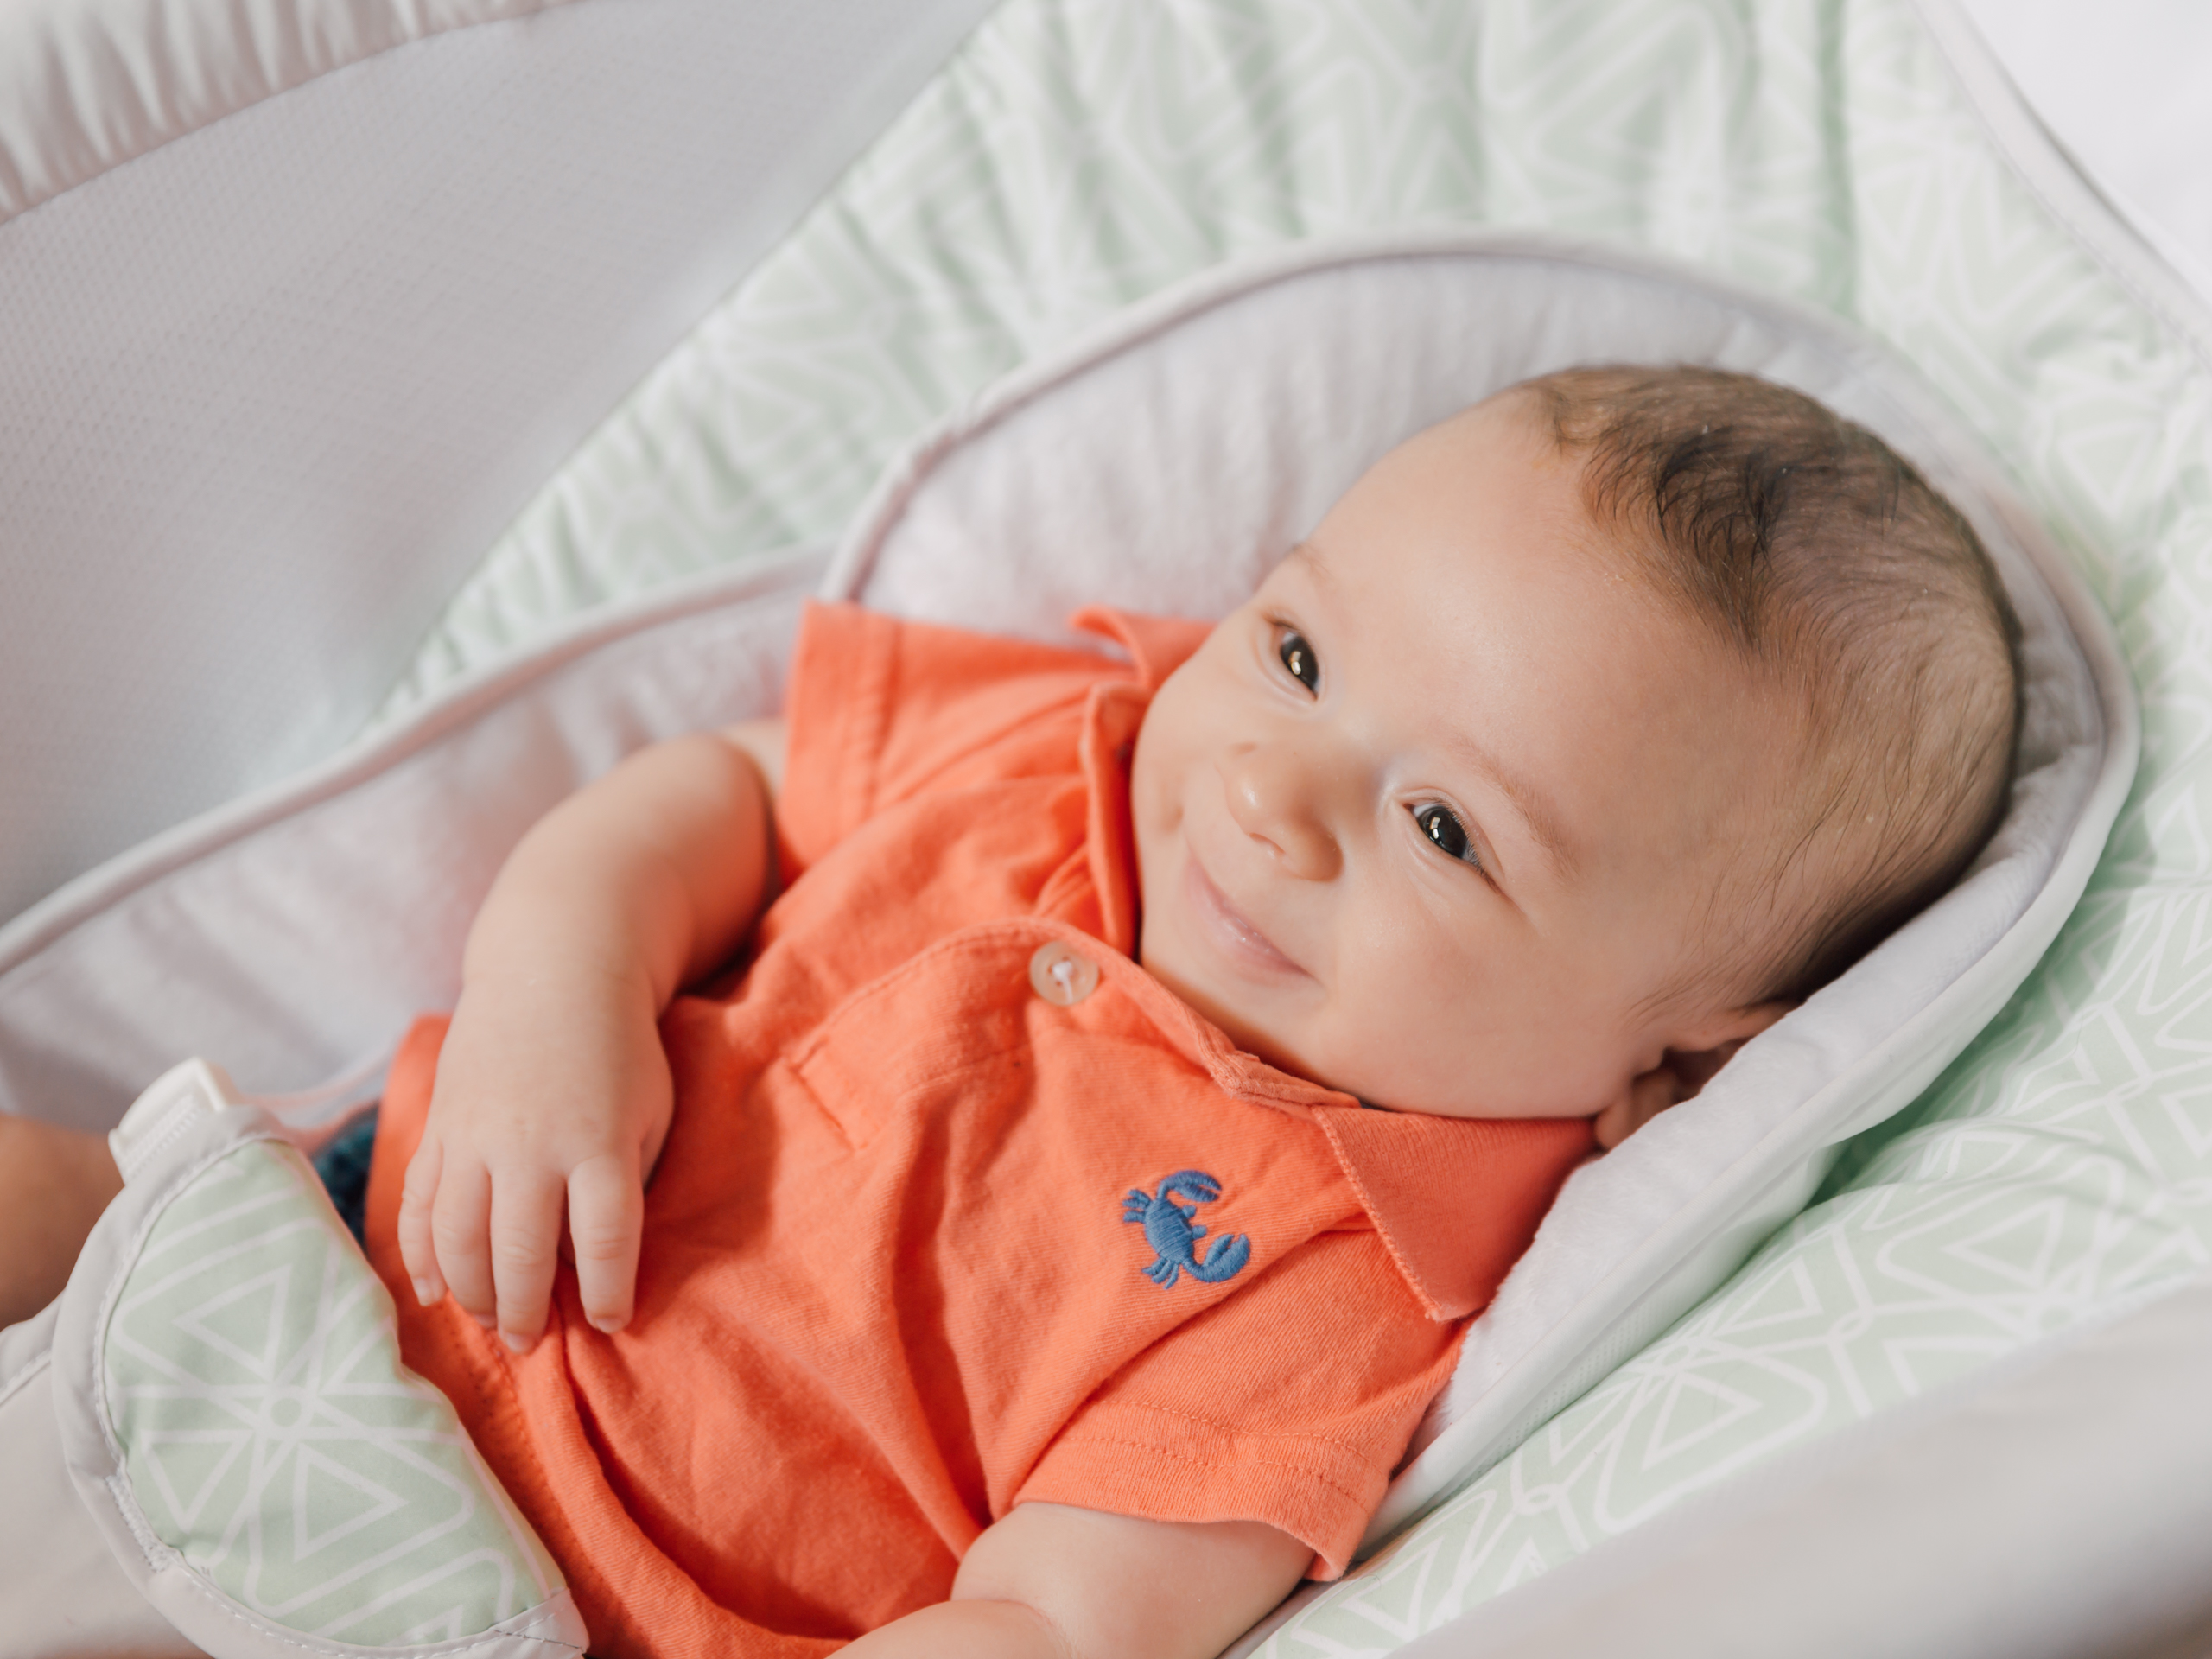 fisher-price-smart-connect-sleeper-product-photos-1.jpg